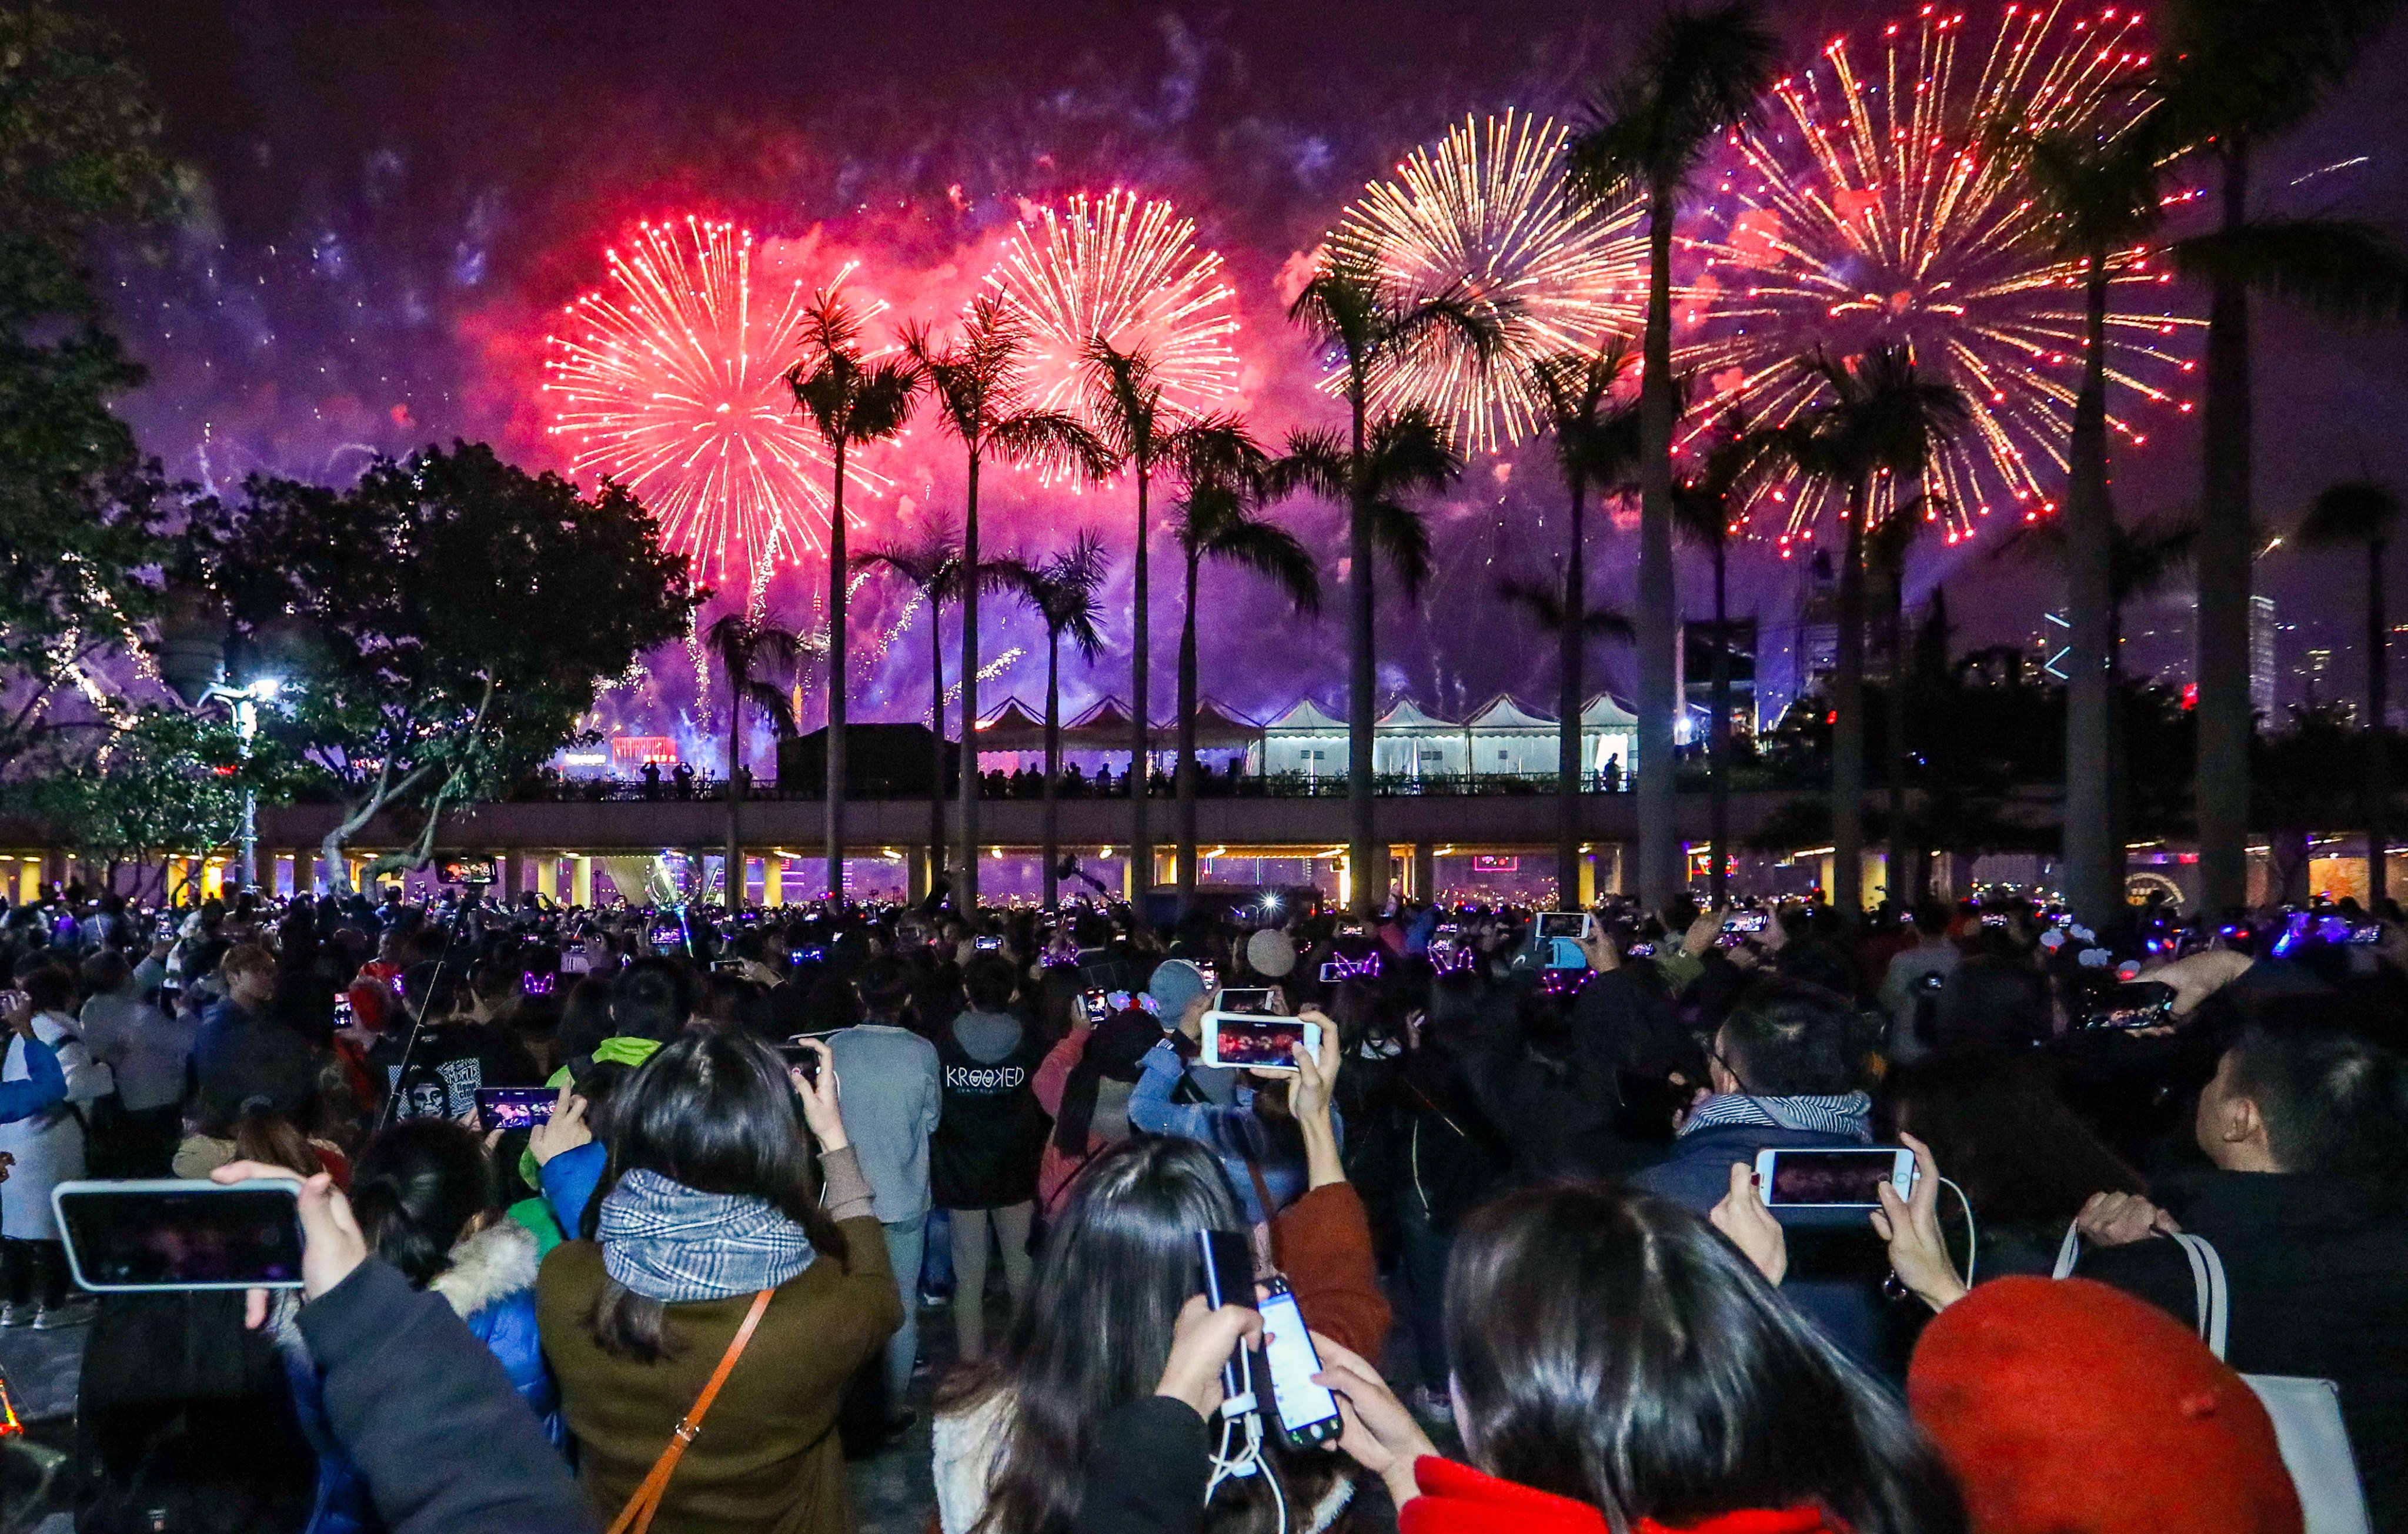 Revellers celebrate New Year’s Eve at the Tsim Sha Tsui waterfront in 2018. Photo: Edmond So